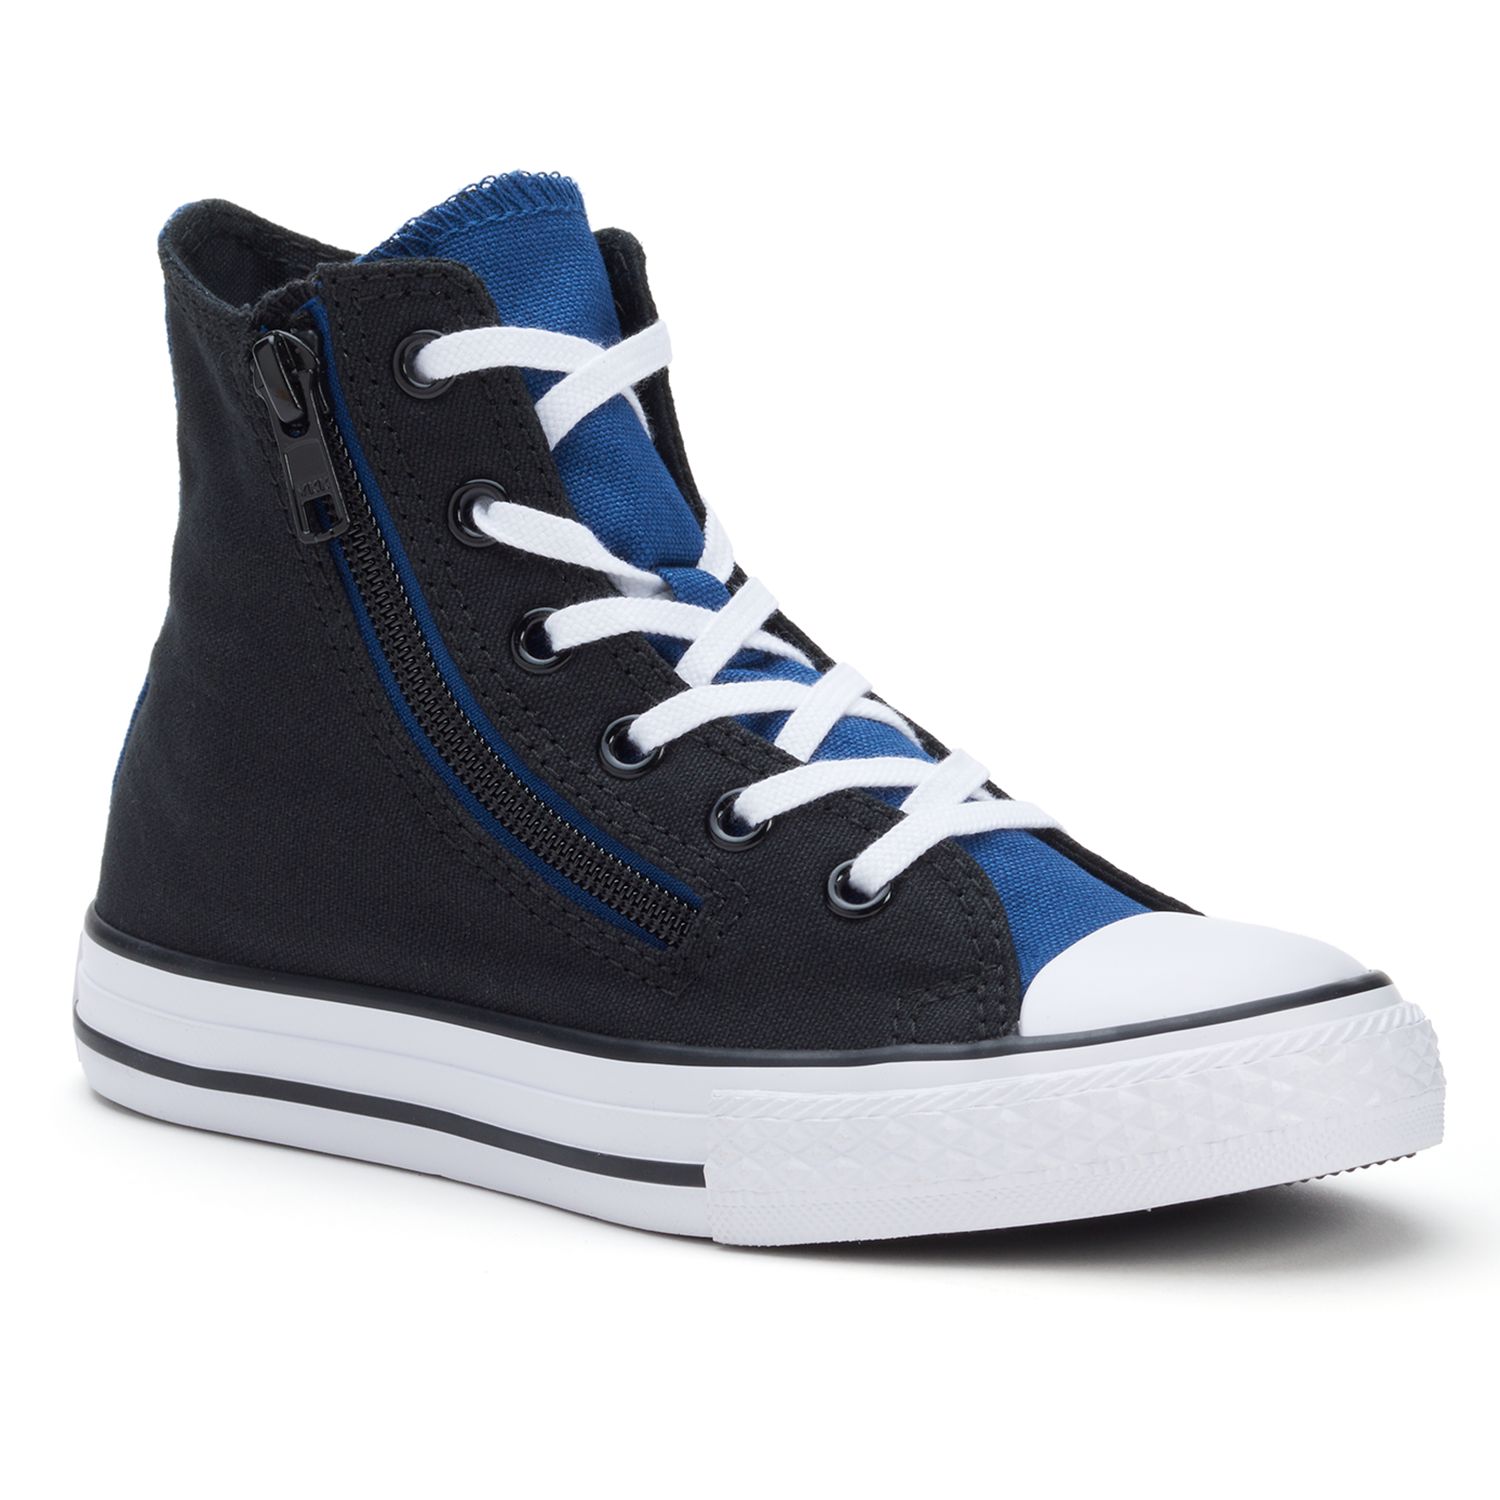 converse all star double zipper high top sneakers